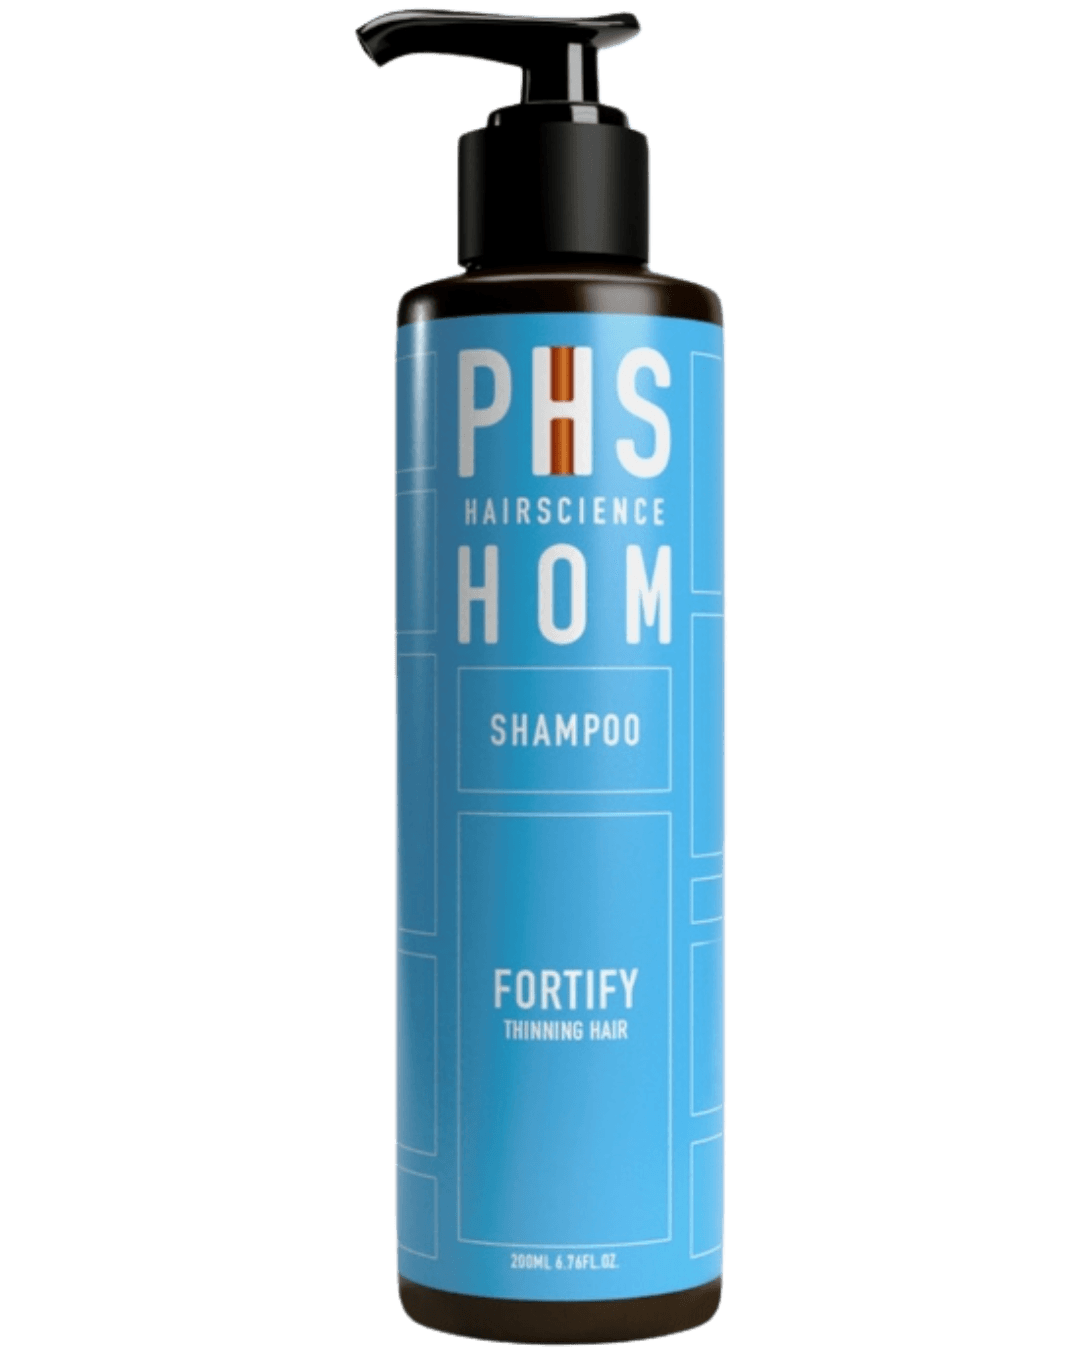 Daily Vanity Beauty Awards 2024 Best  PHS HAIRSCIENCE Hairscience HOM Fortify Shampoo Voted By Beauty Experts